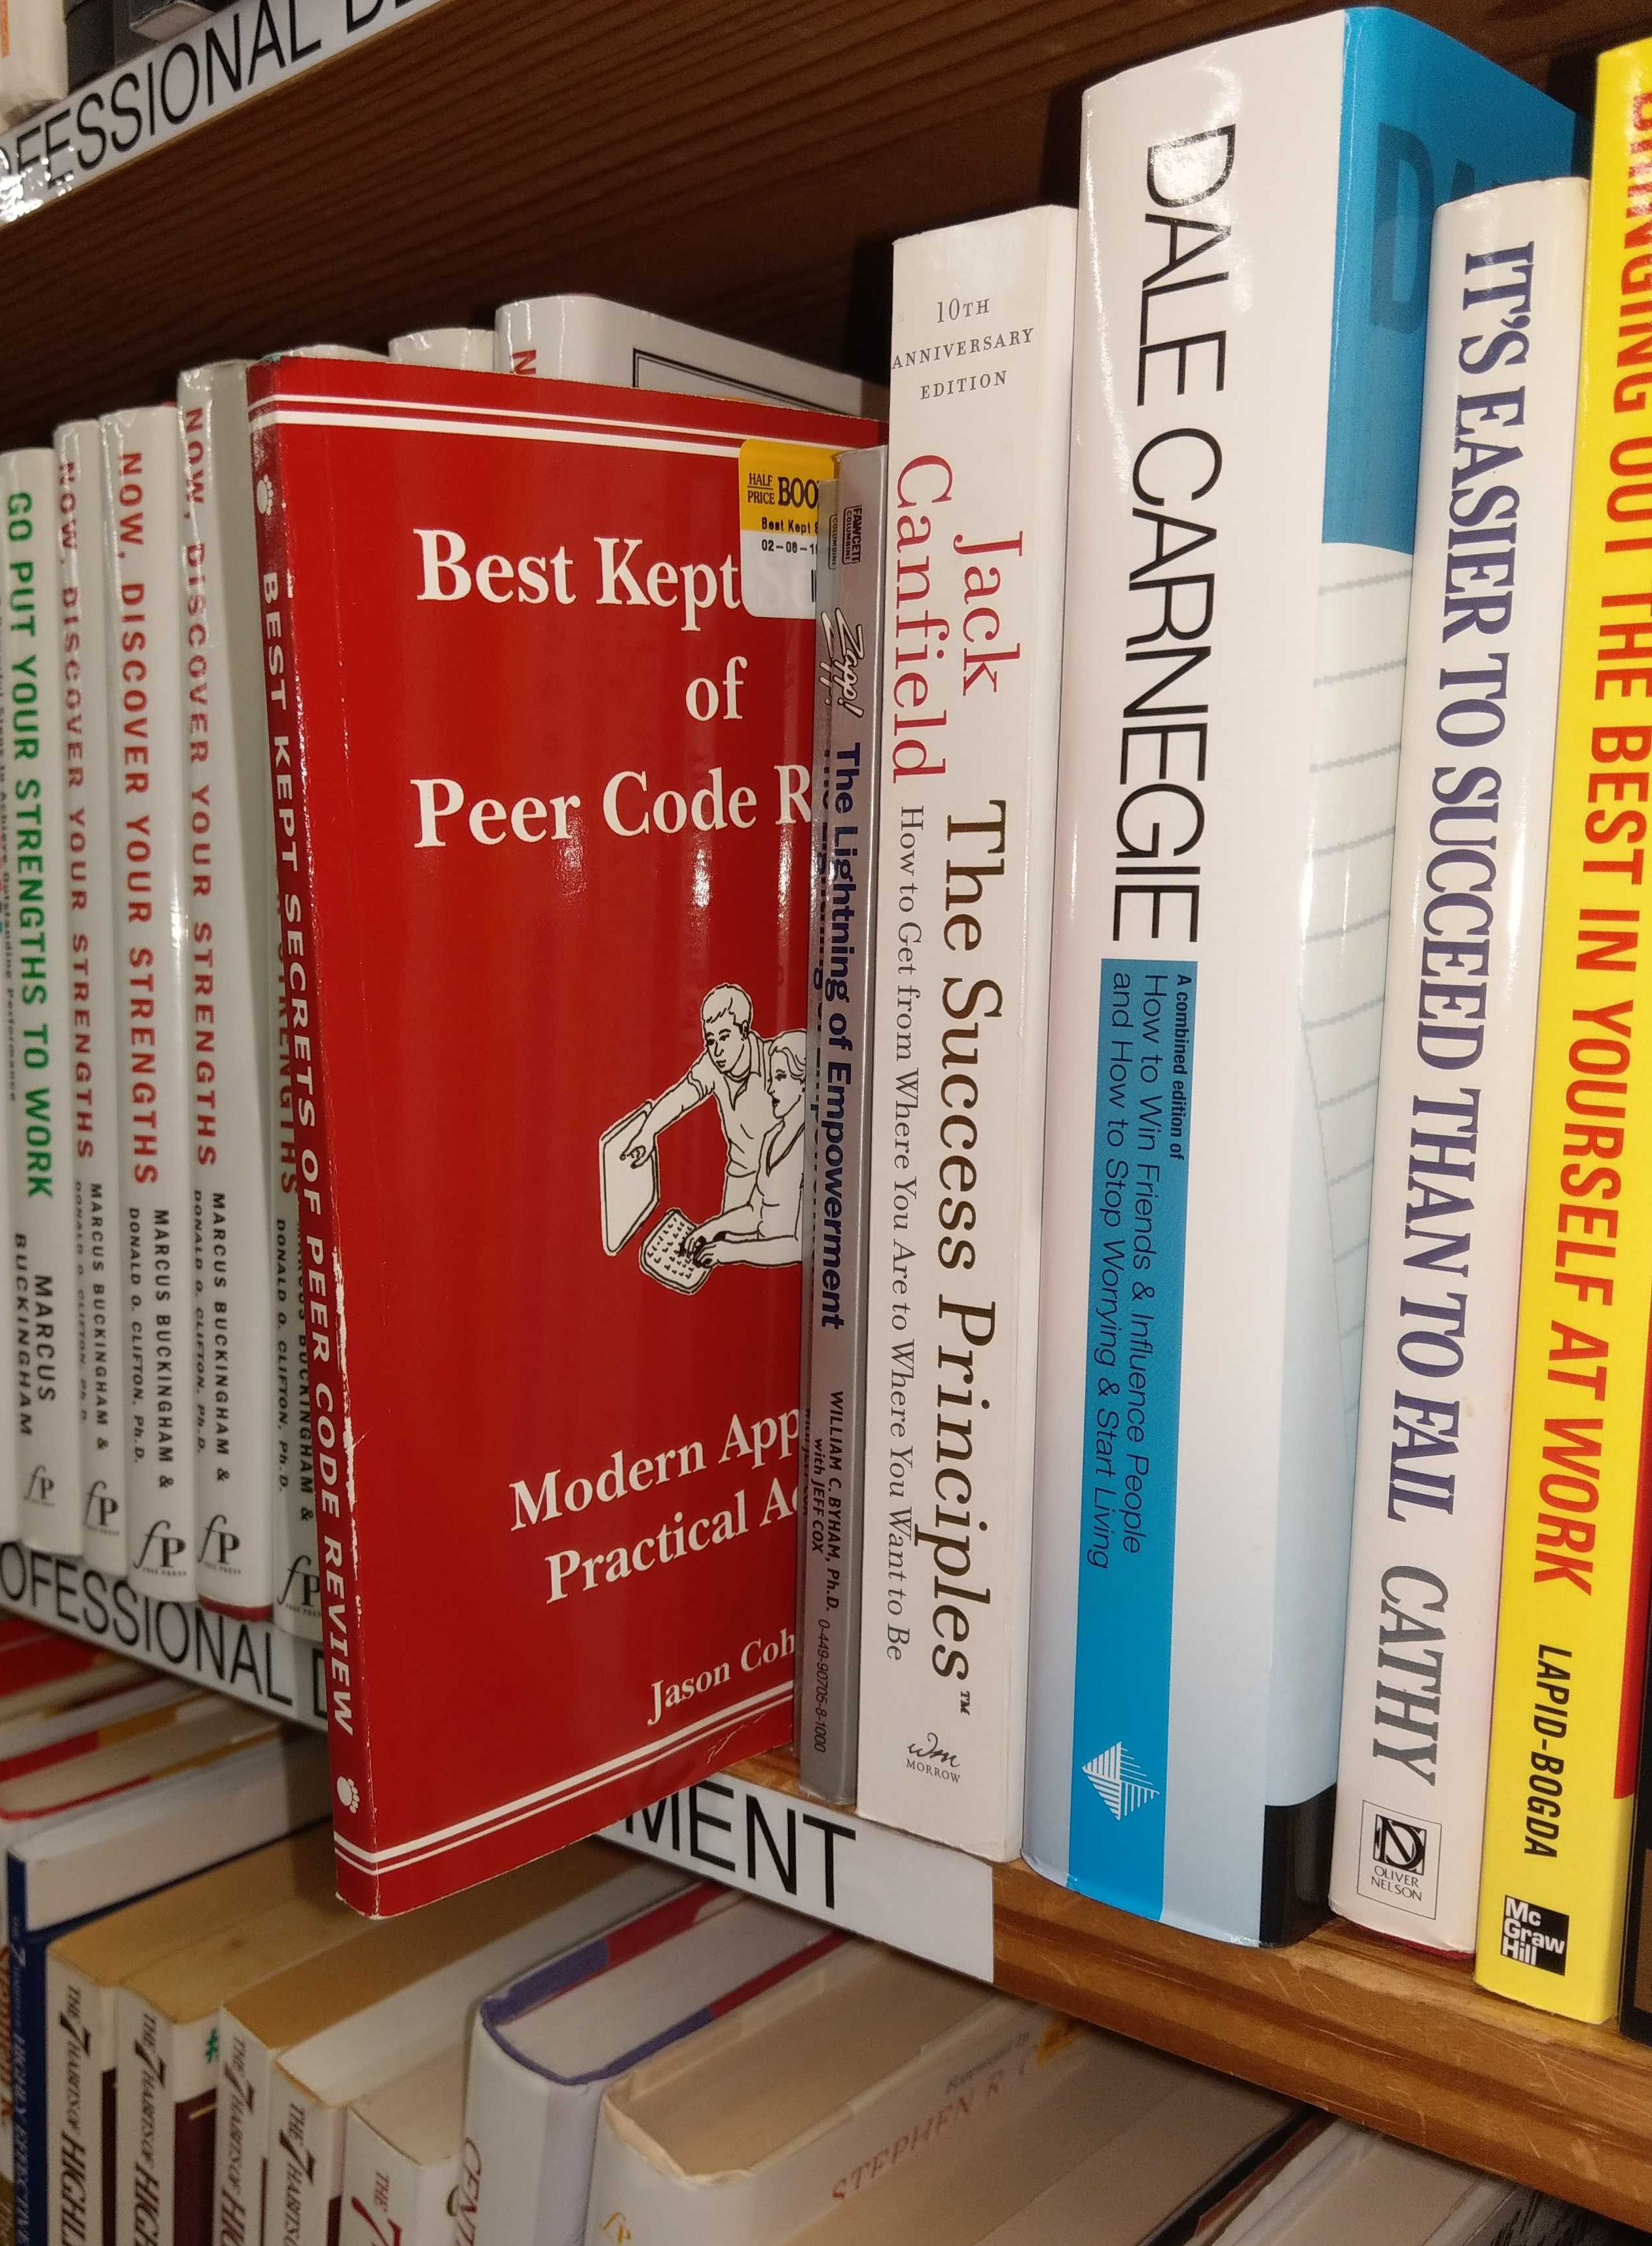 my book "Best Kept Secrets of Peer Code Review" on the shelf at a used book store